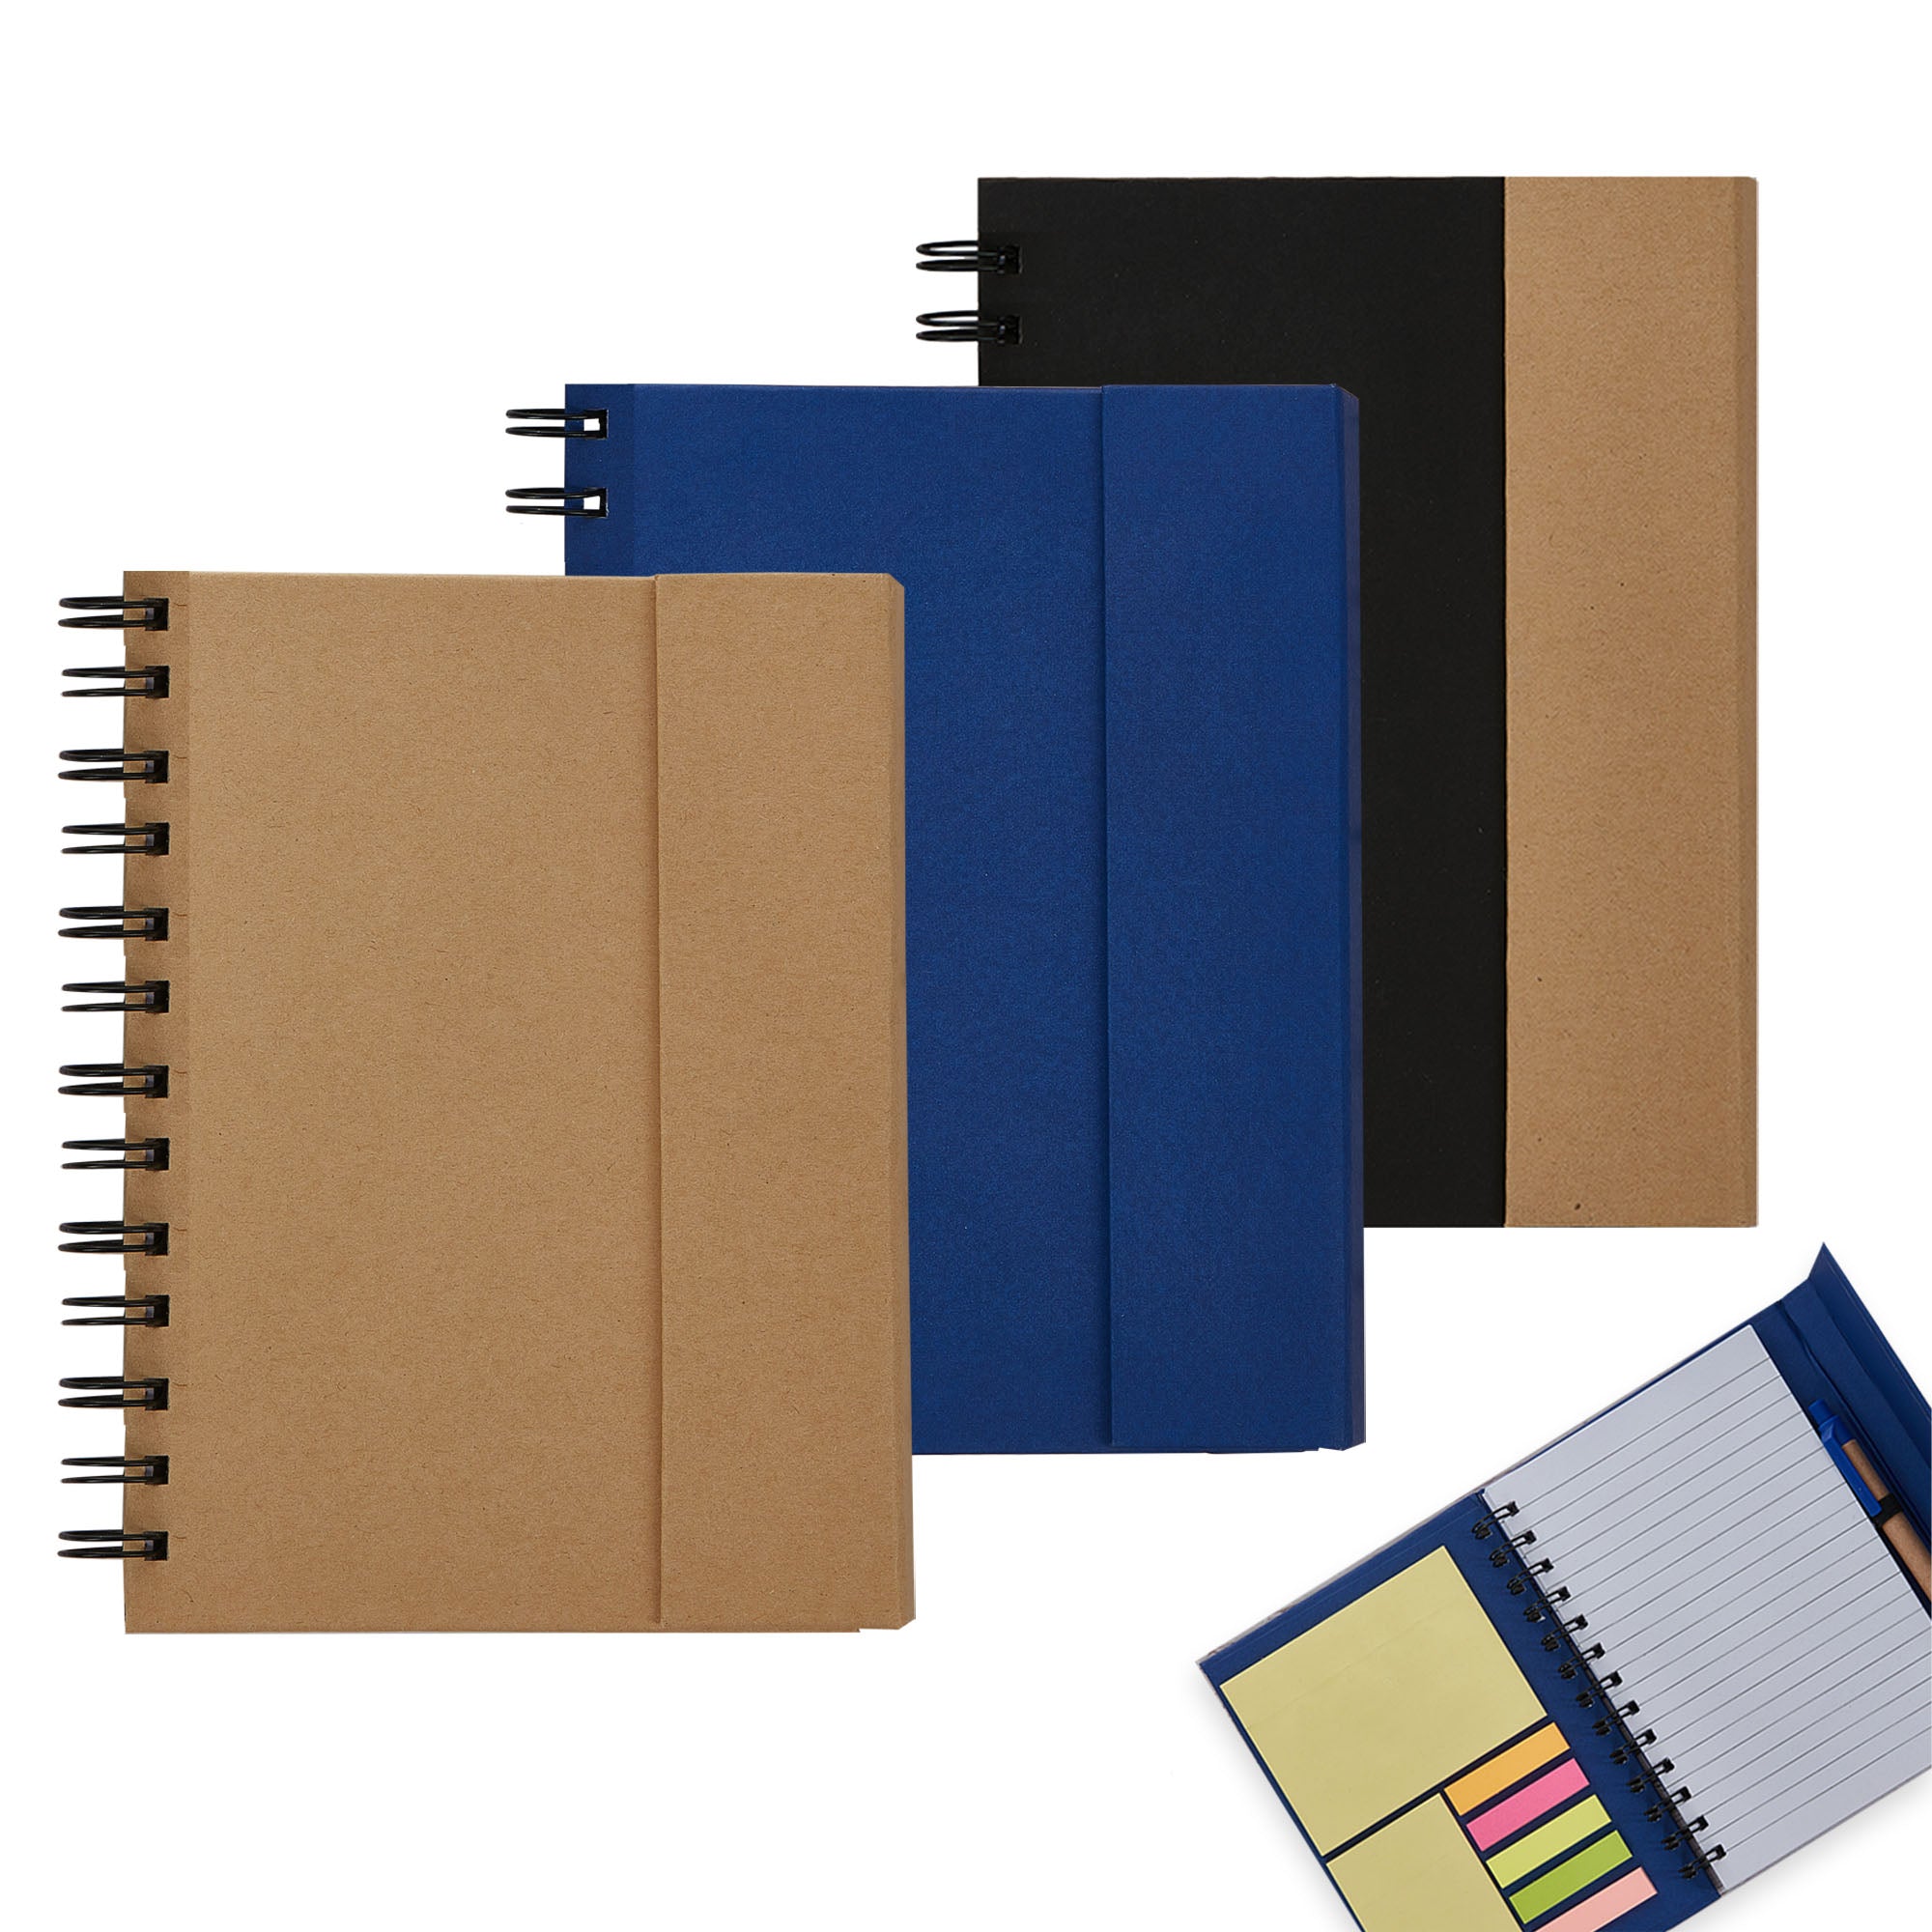 Keebo Notebook (SNBS-33D)